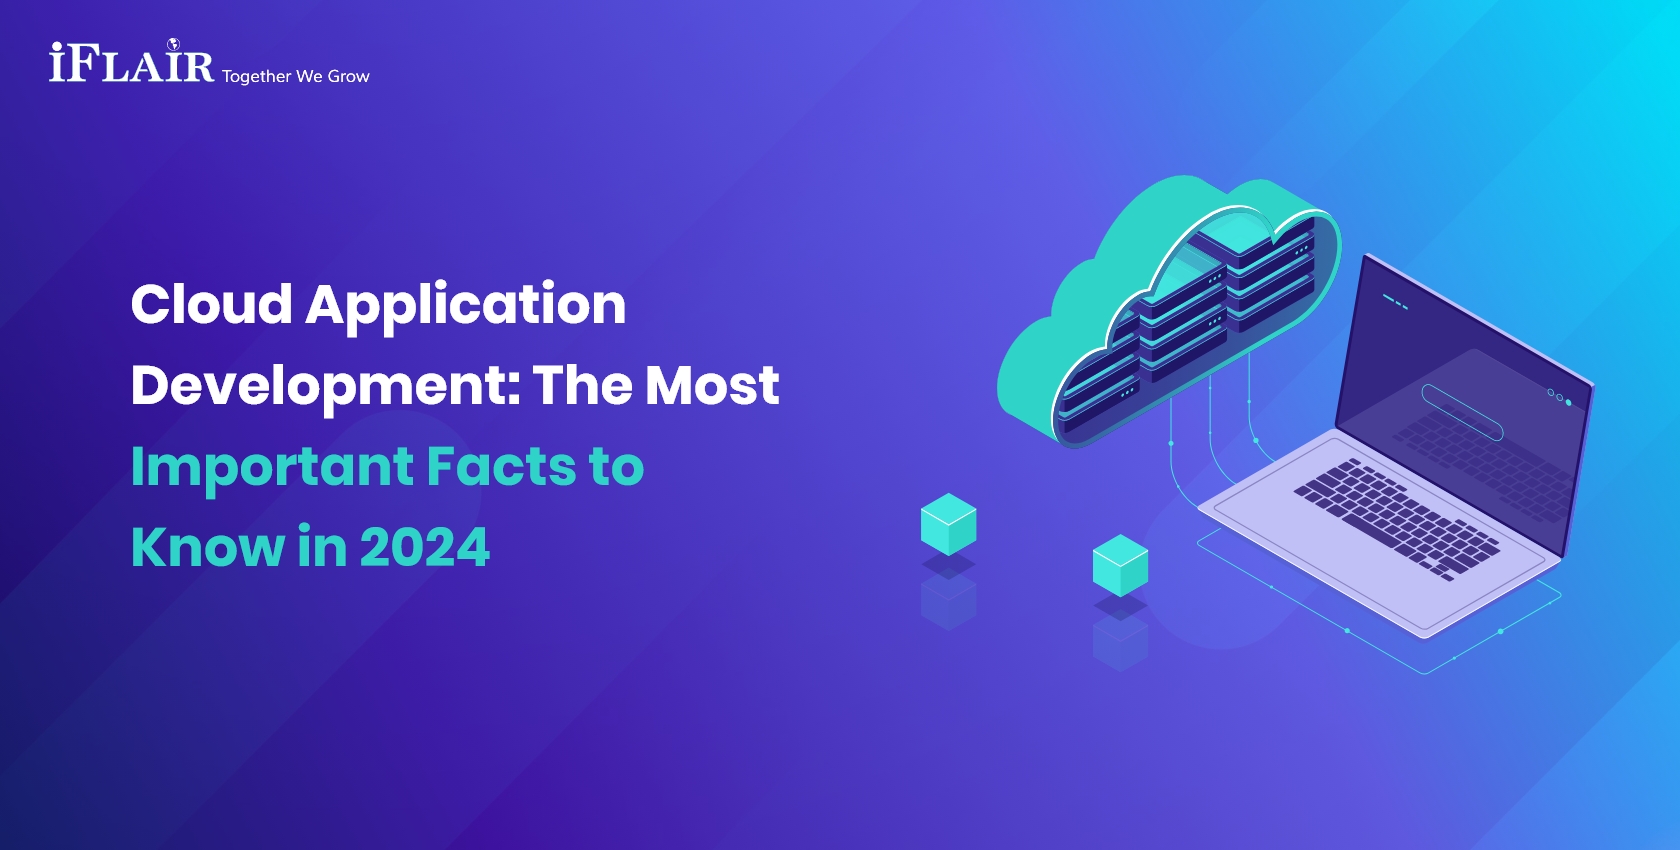 Cloud Application Development: The Most Important Facts to Know in 2024